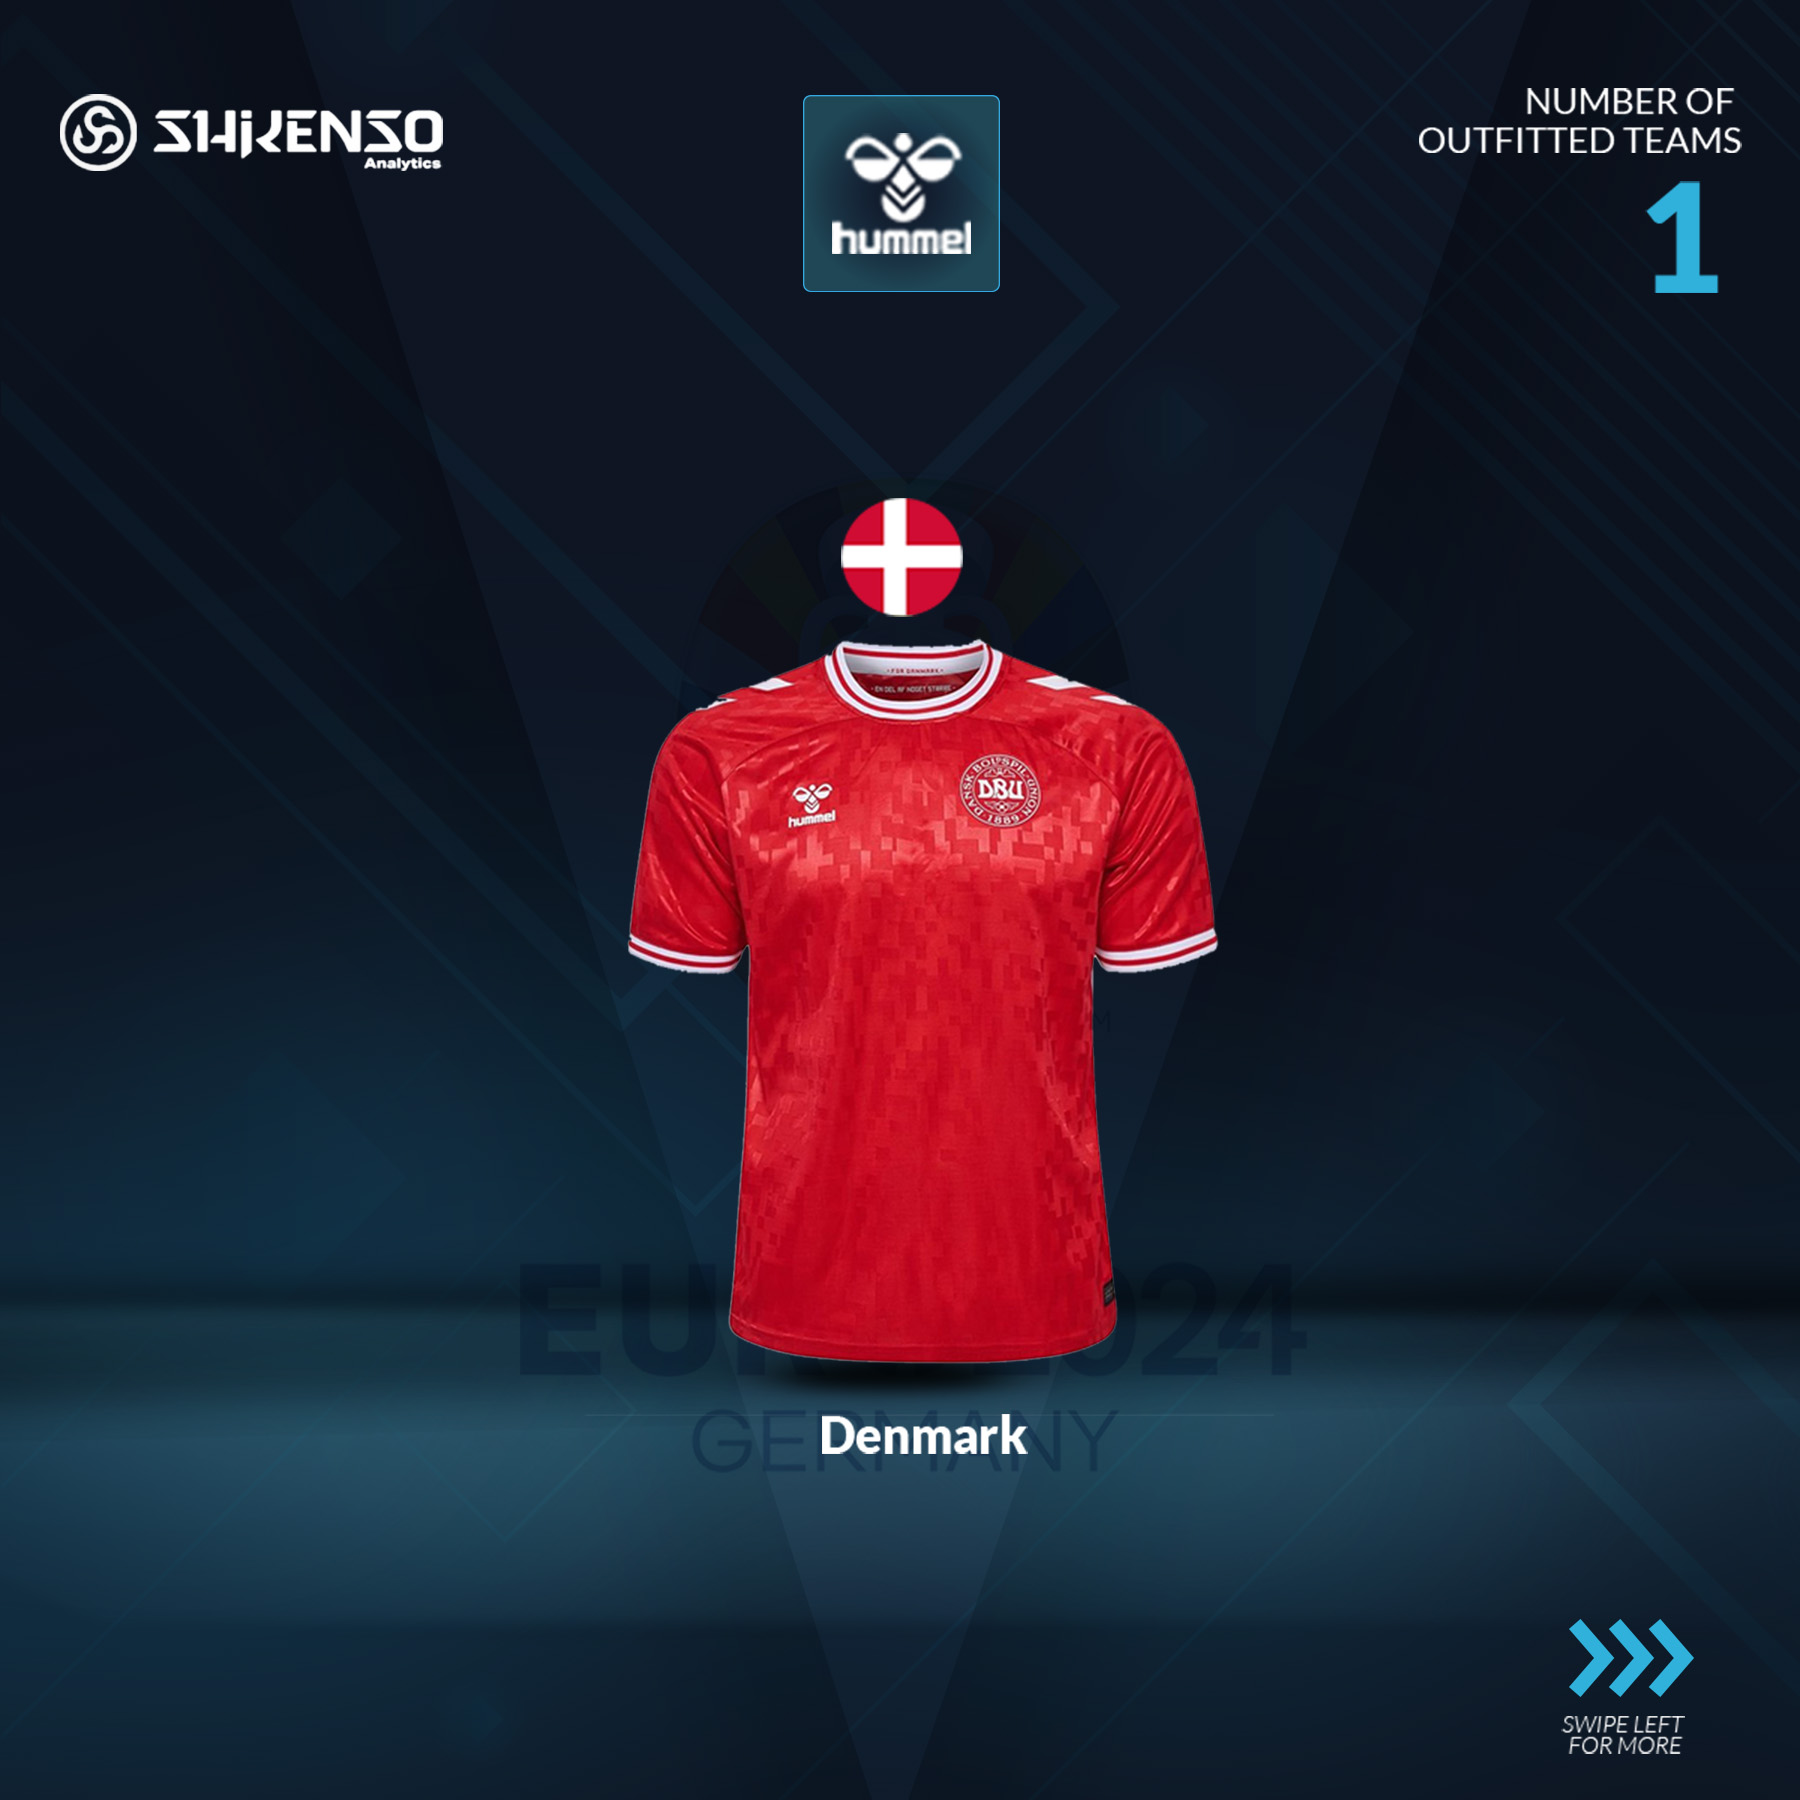 Graphic showcasing the national teams sponsored by Hummel for EURO 2024, detailing Hummel's outfitting partnership